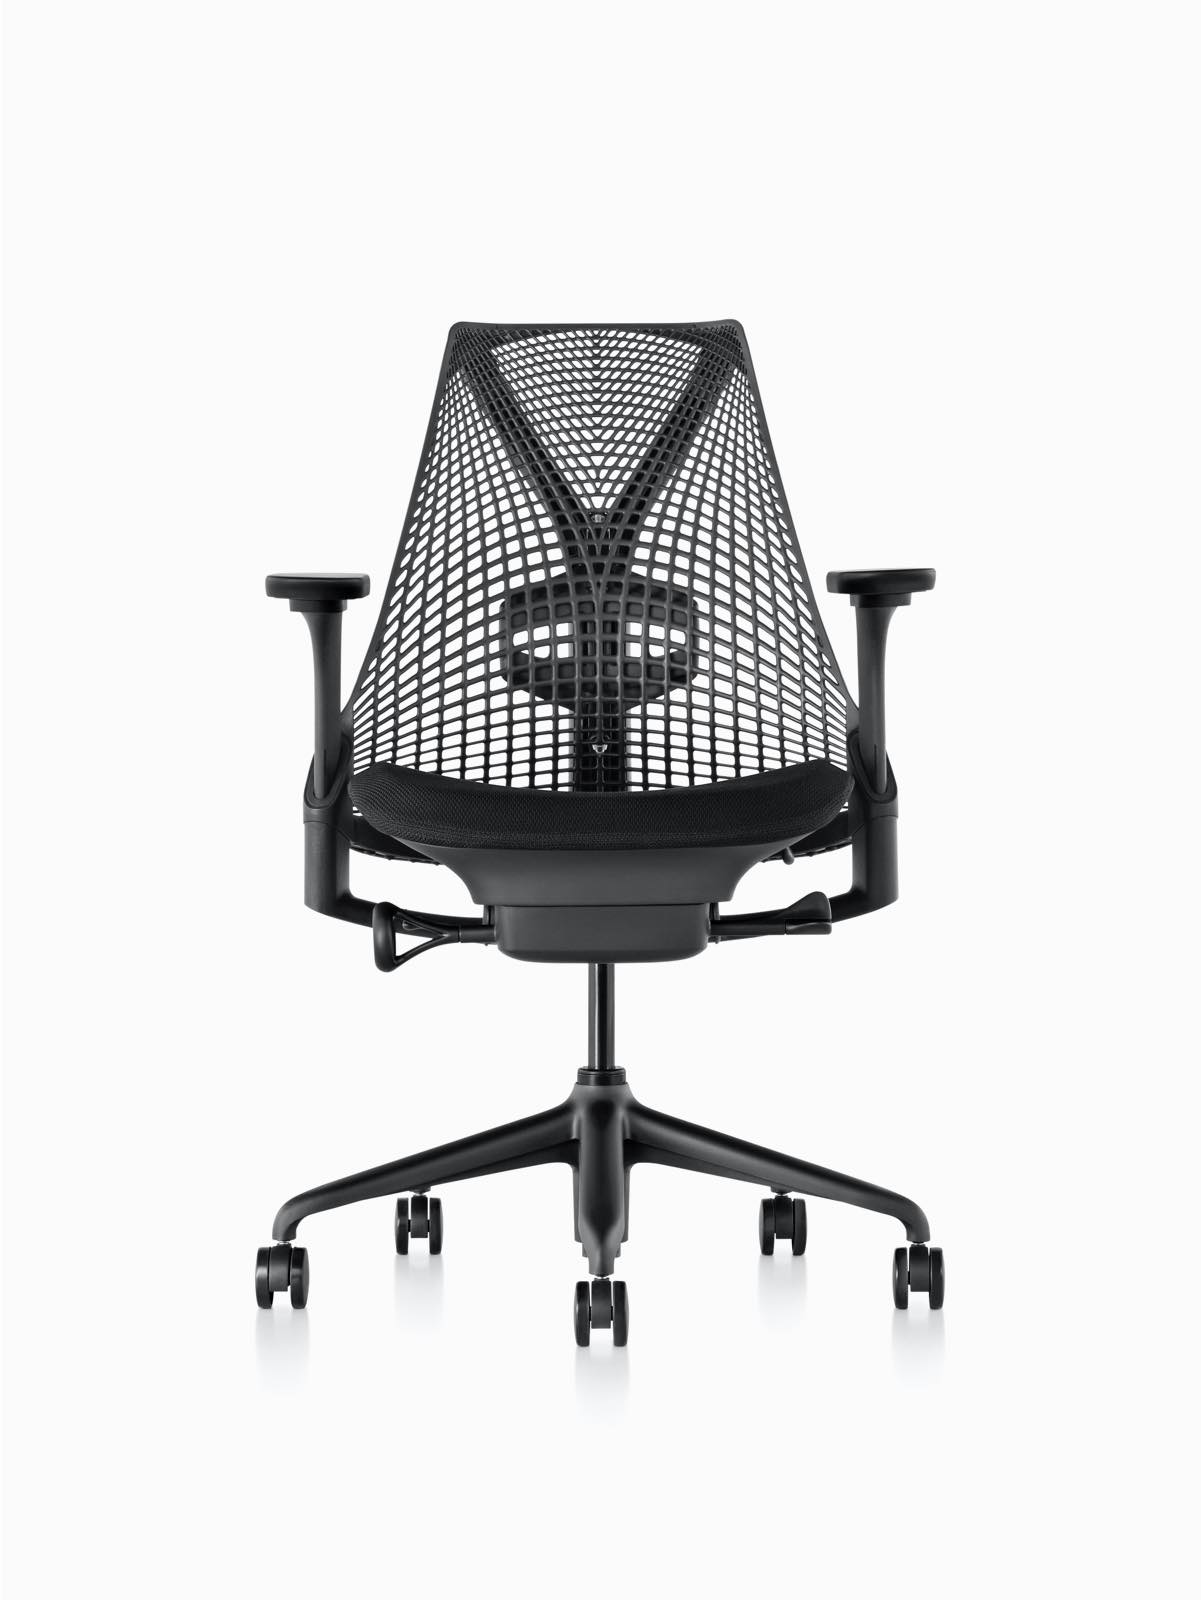 Black Sayl office chair with a suspension back, viewed from the front. Select to go to the Sayl Chairs product page.